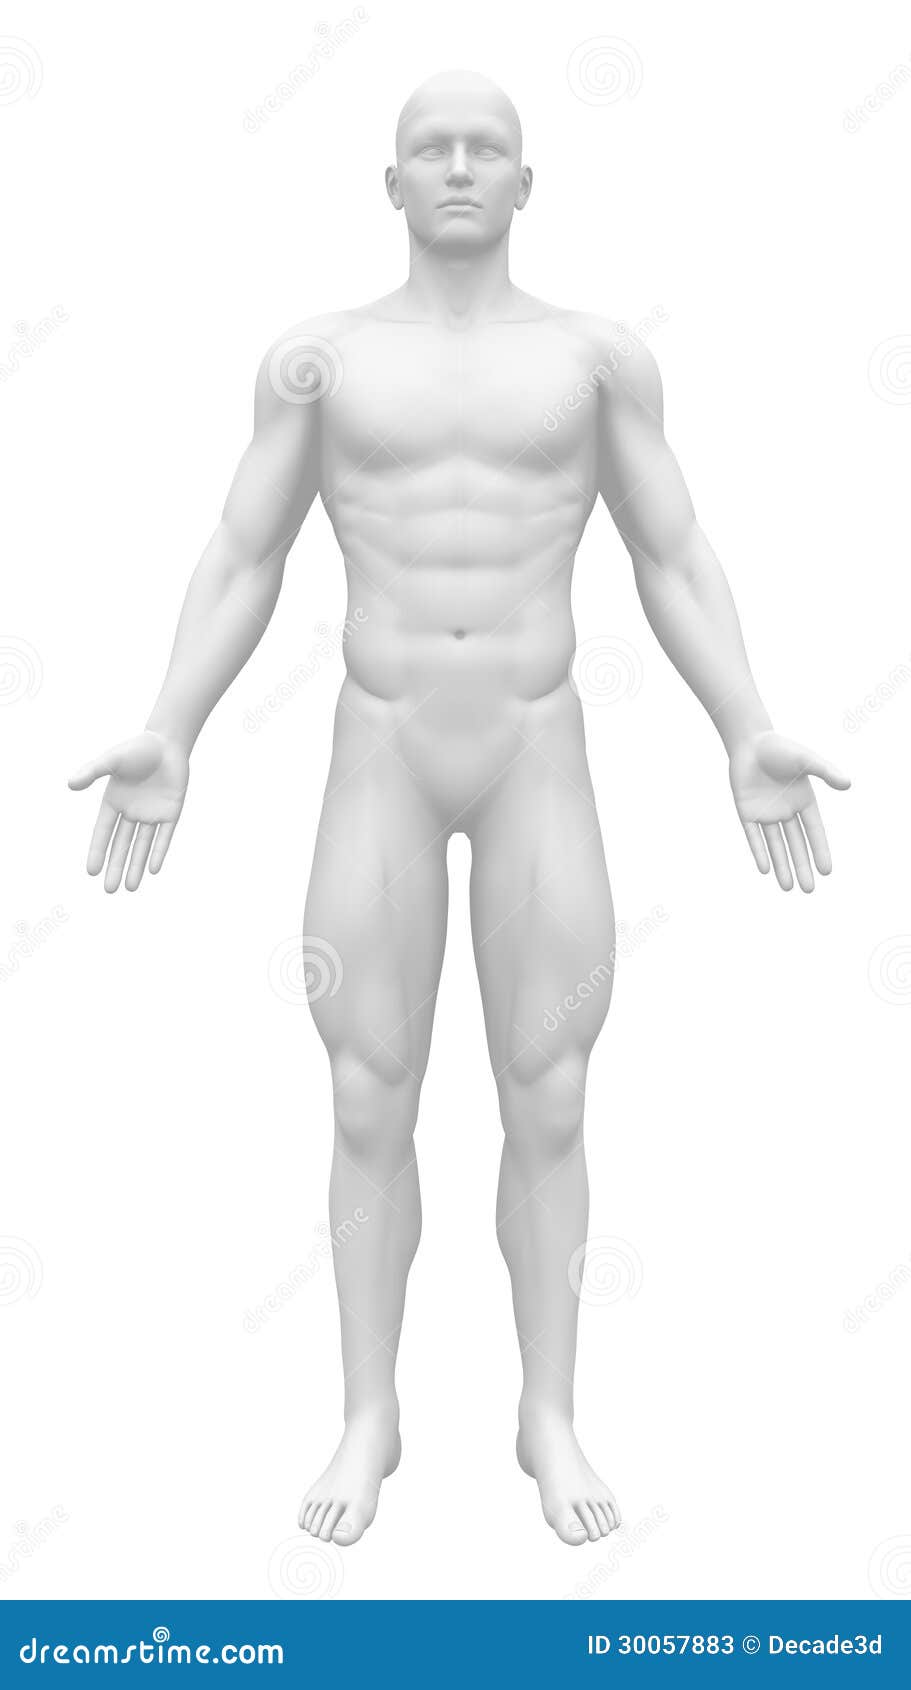 blank anatomy figure - front view